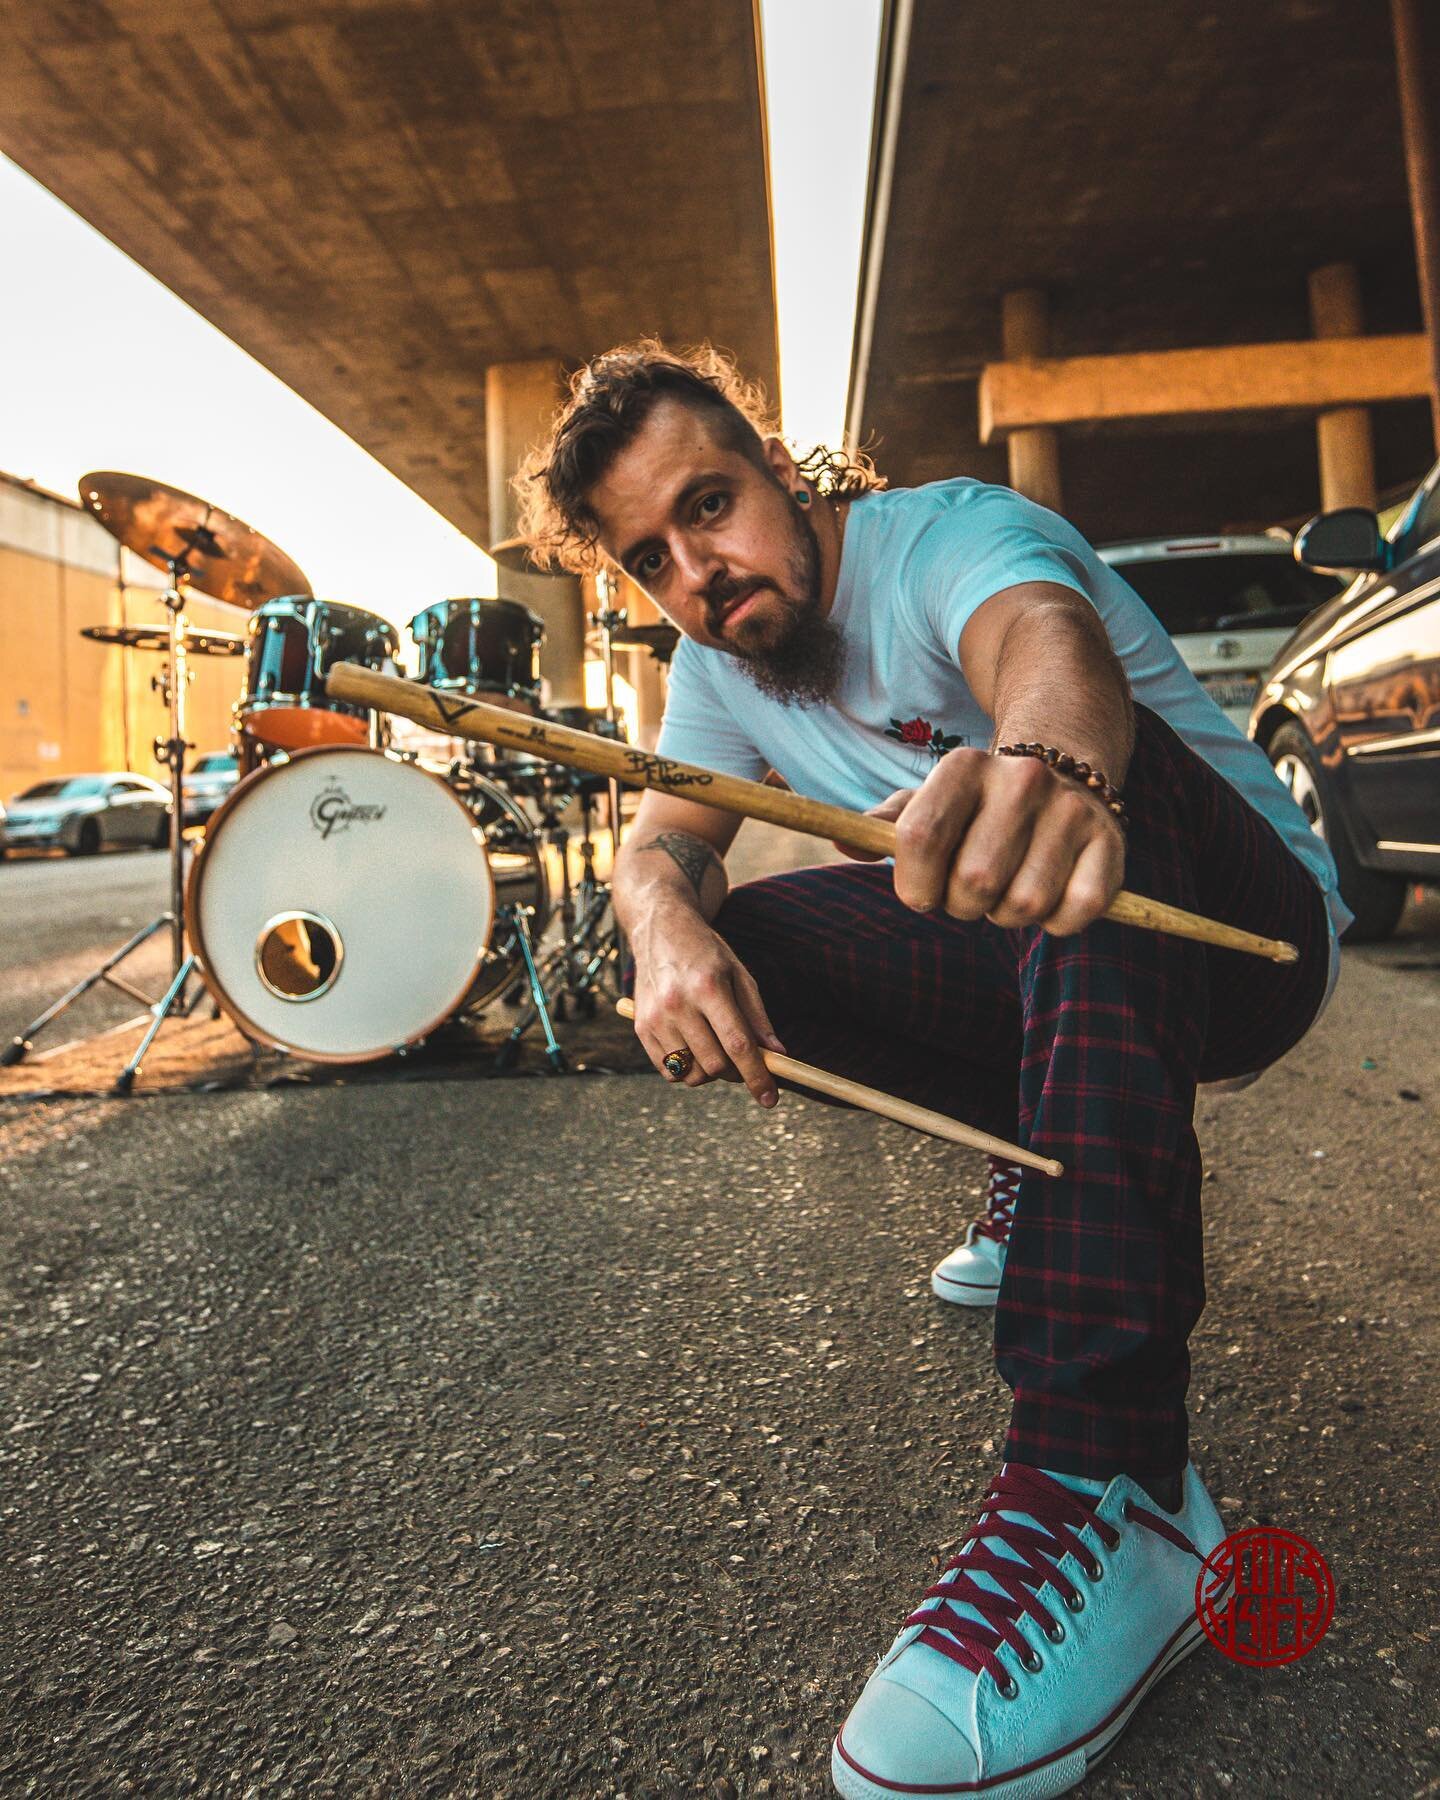 check out these awesome shots with BETO @beatalks 
Drummer/Percussionist/Producer

We roamed around DTLA and found a nice spot under the 10fwy where the sunlight peaked through for the #goldenhour very happy the way these shots turned out. Be sure to